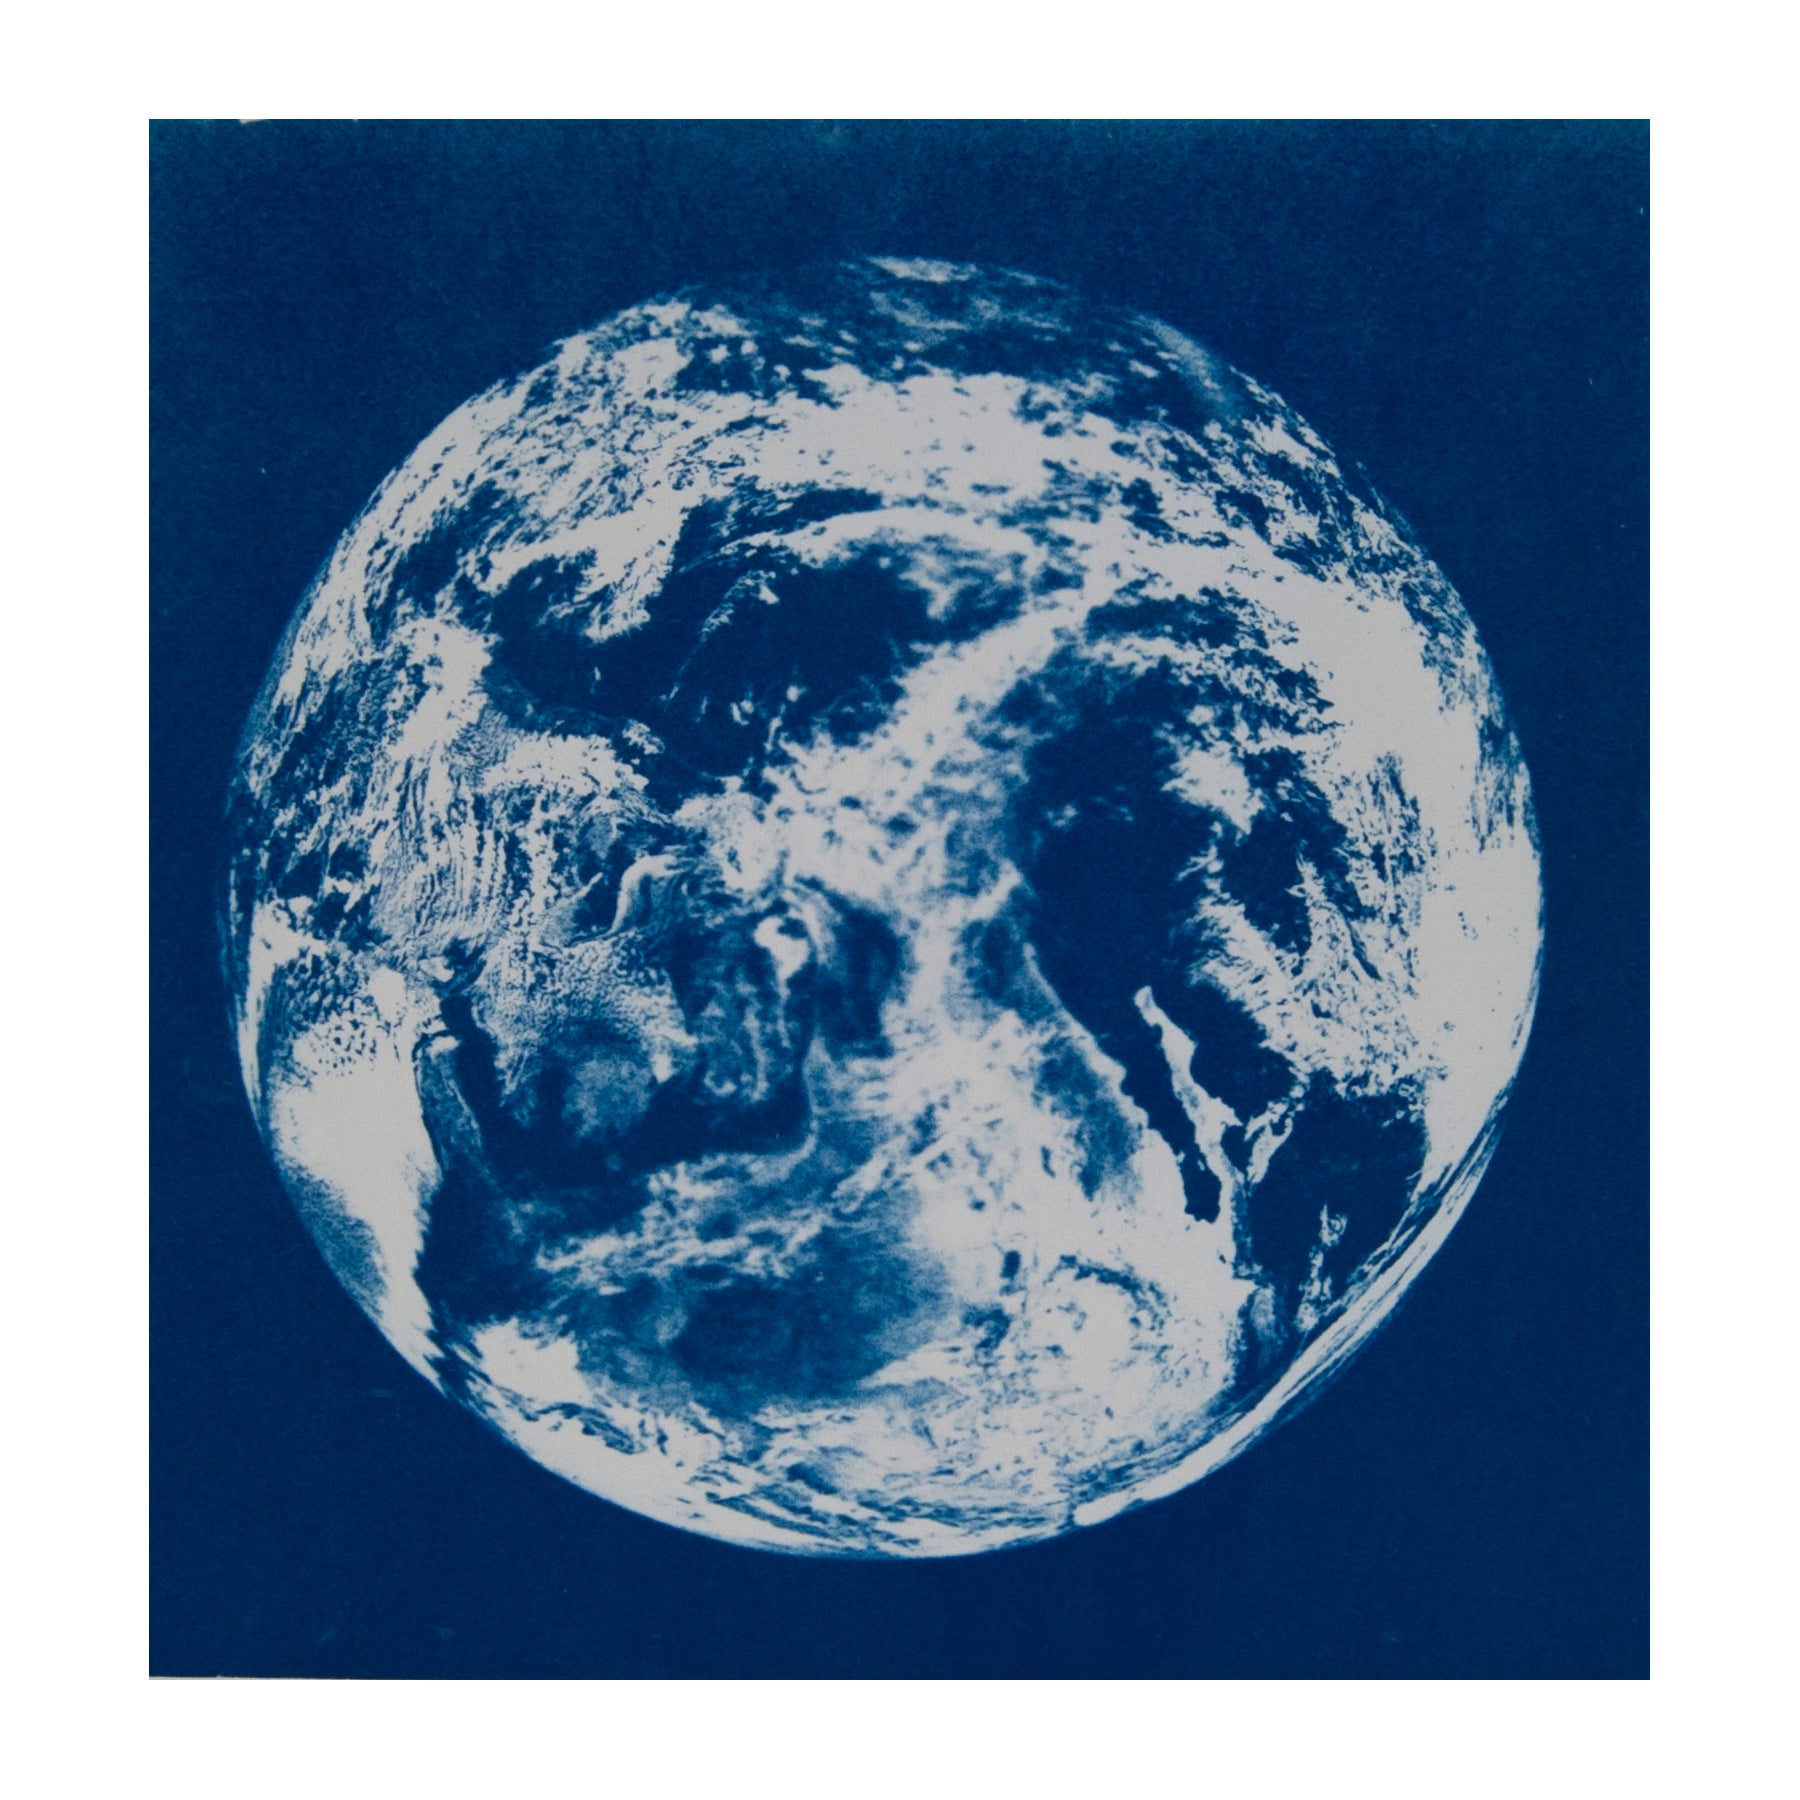 A cyanotype print of the Earth. (Image: © Lynda Laird)